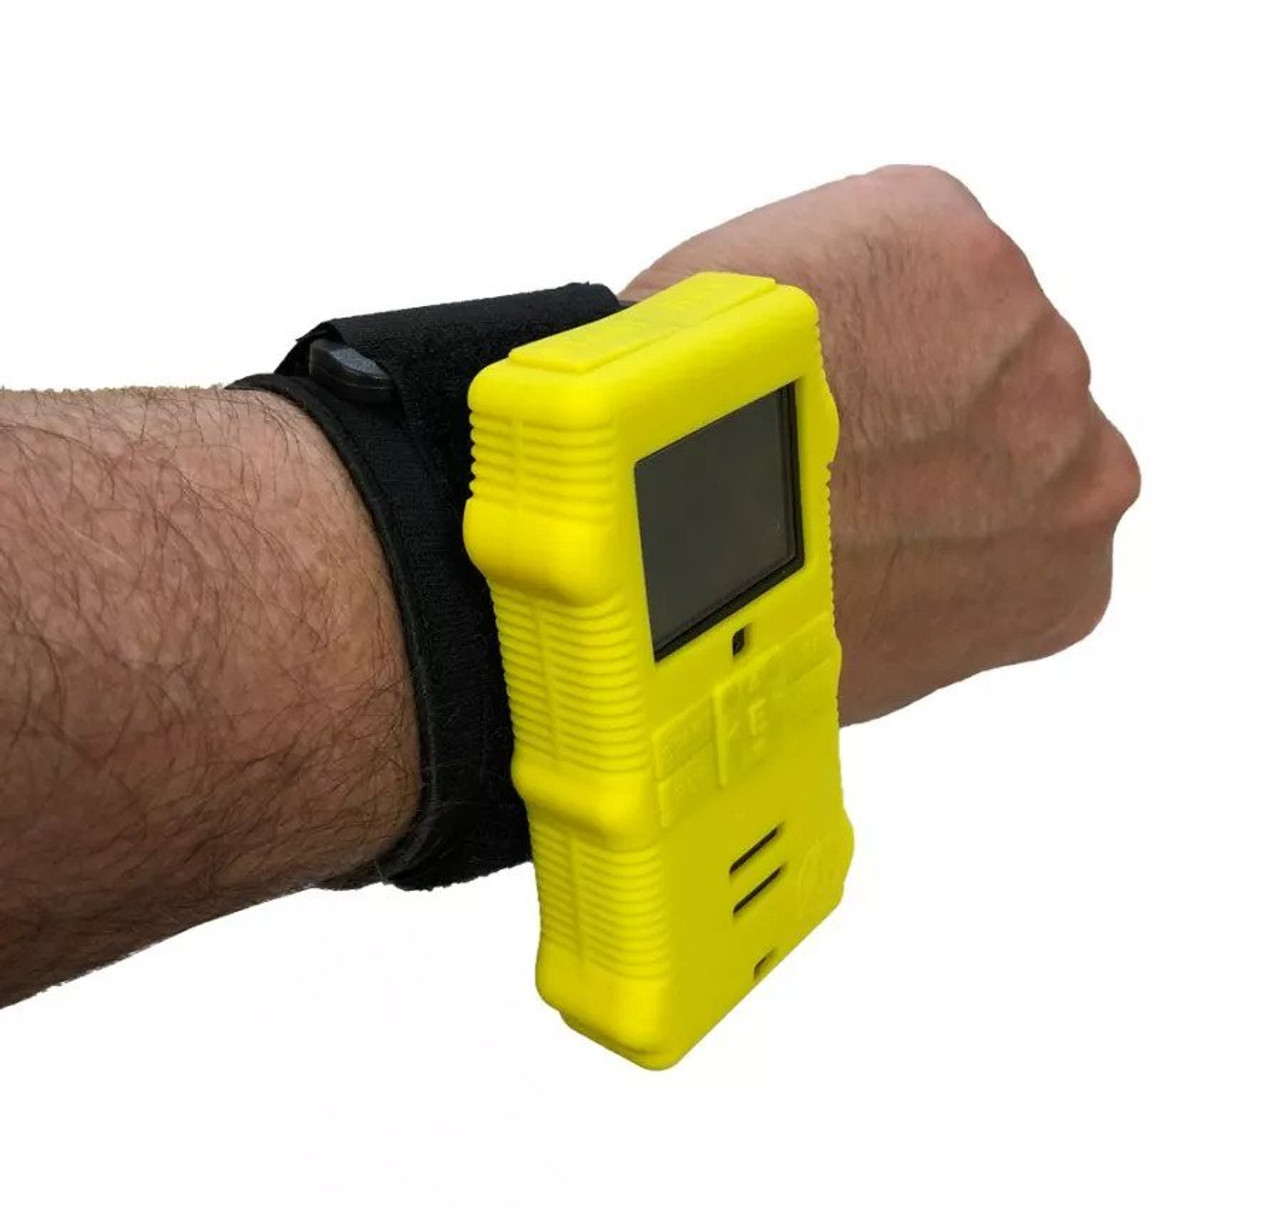 Wrist Band with Timer Attachment | BSPS